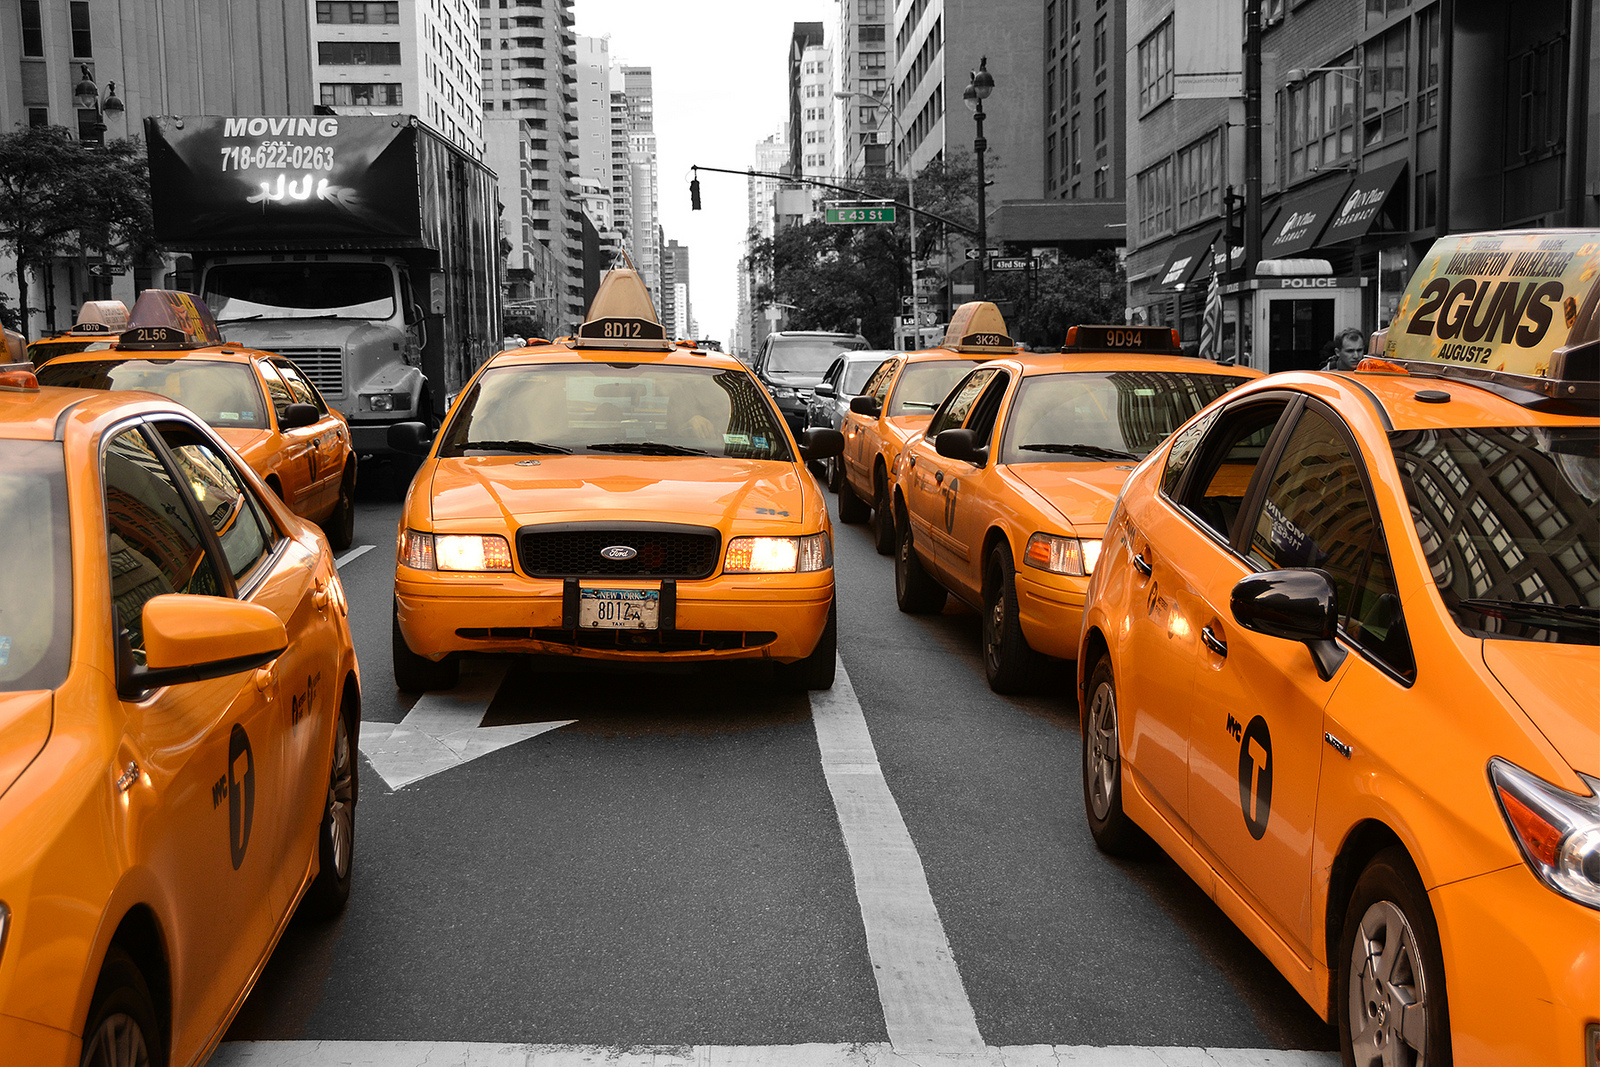 Taxis and Ubers in Manhattan will get more expensive as judge gives congestion fees the green light